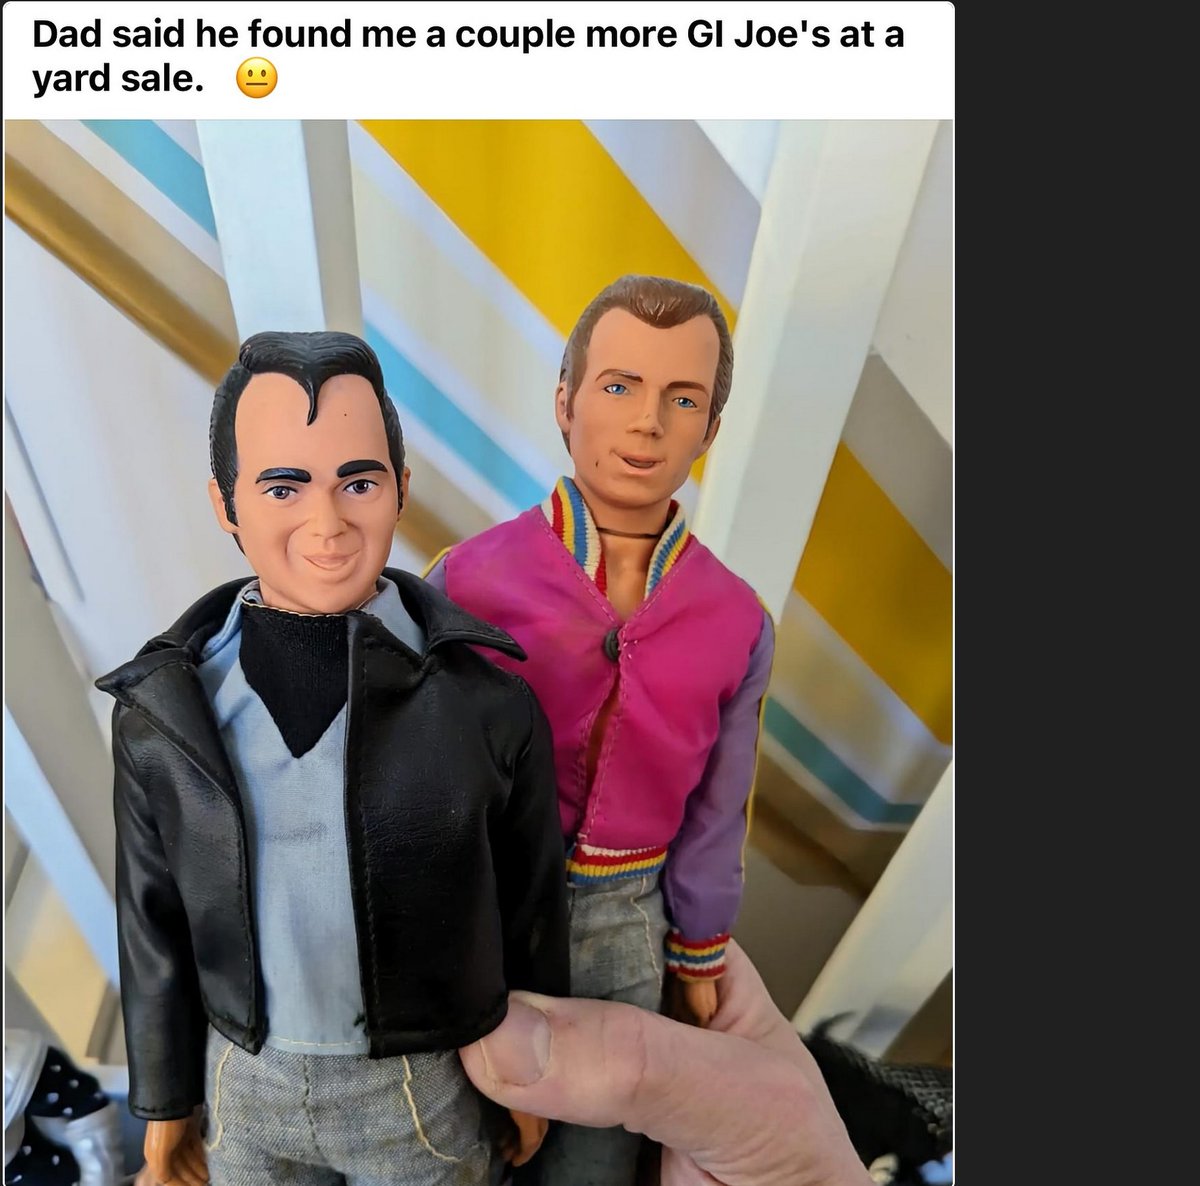 OMG! Lenny and Squiggy dolls! 
#laverneandshirley